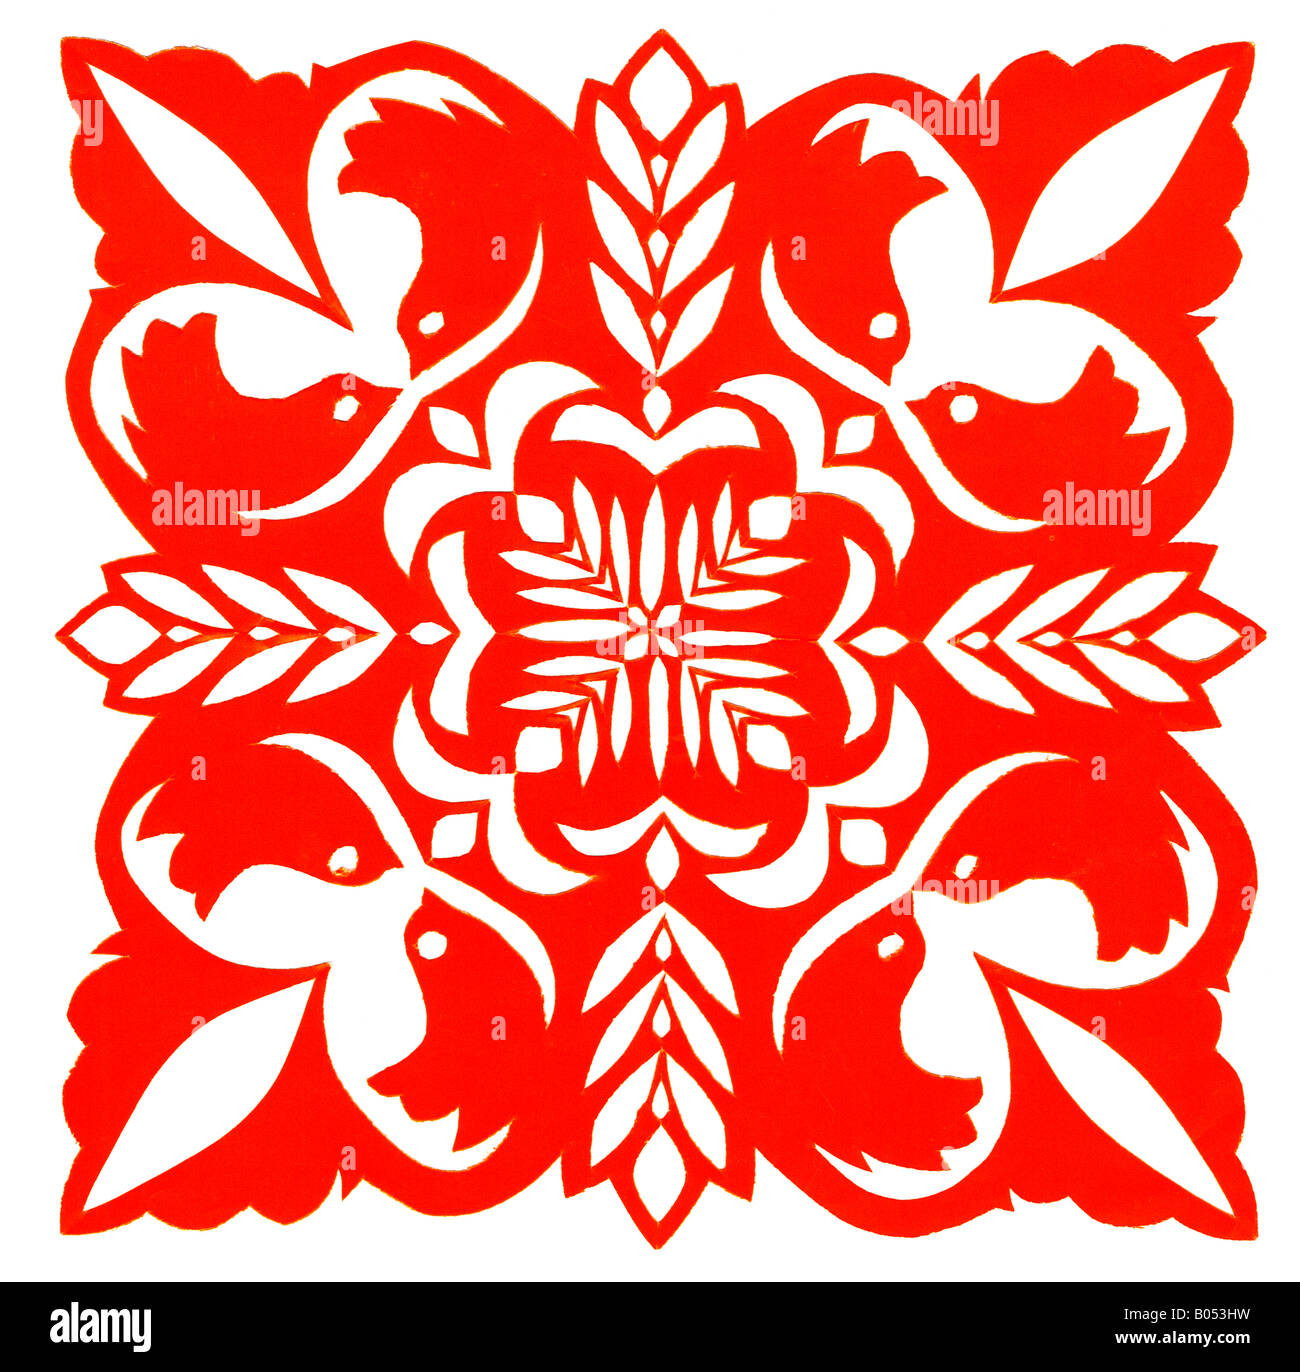 Contemporary square paper cutting with symmetrical floral design with birds by Miss Wanda Skowron from Warszawa Poland 2008 Stock Photo